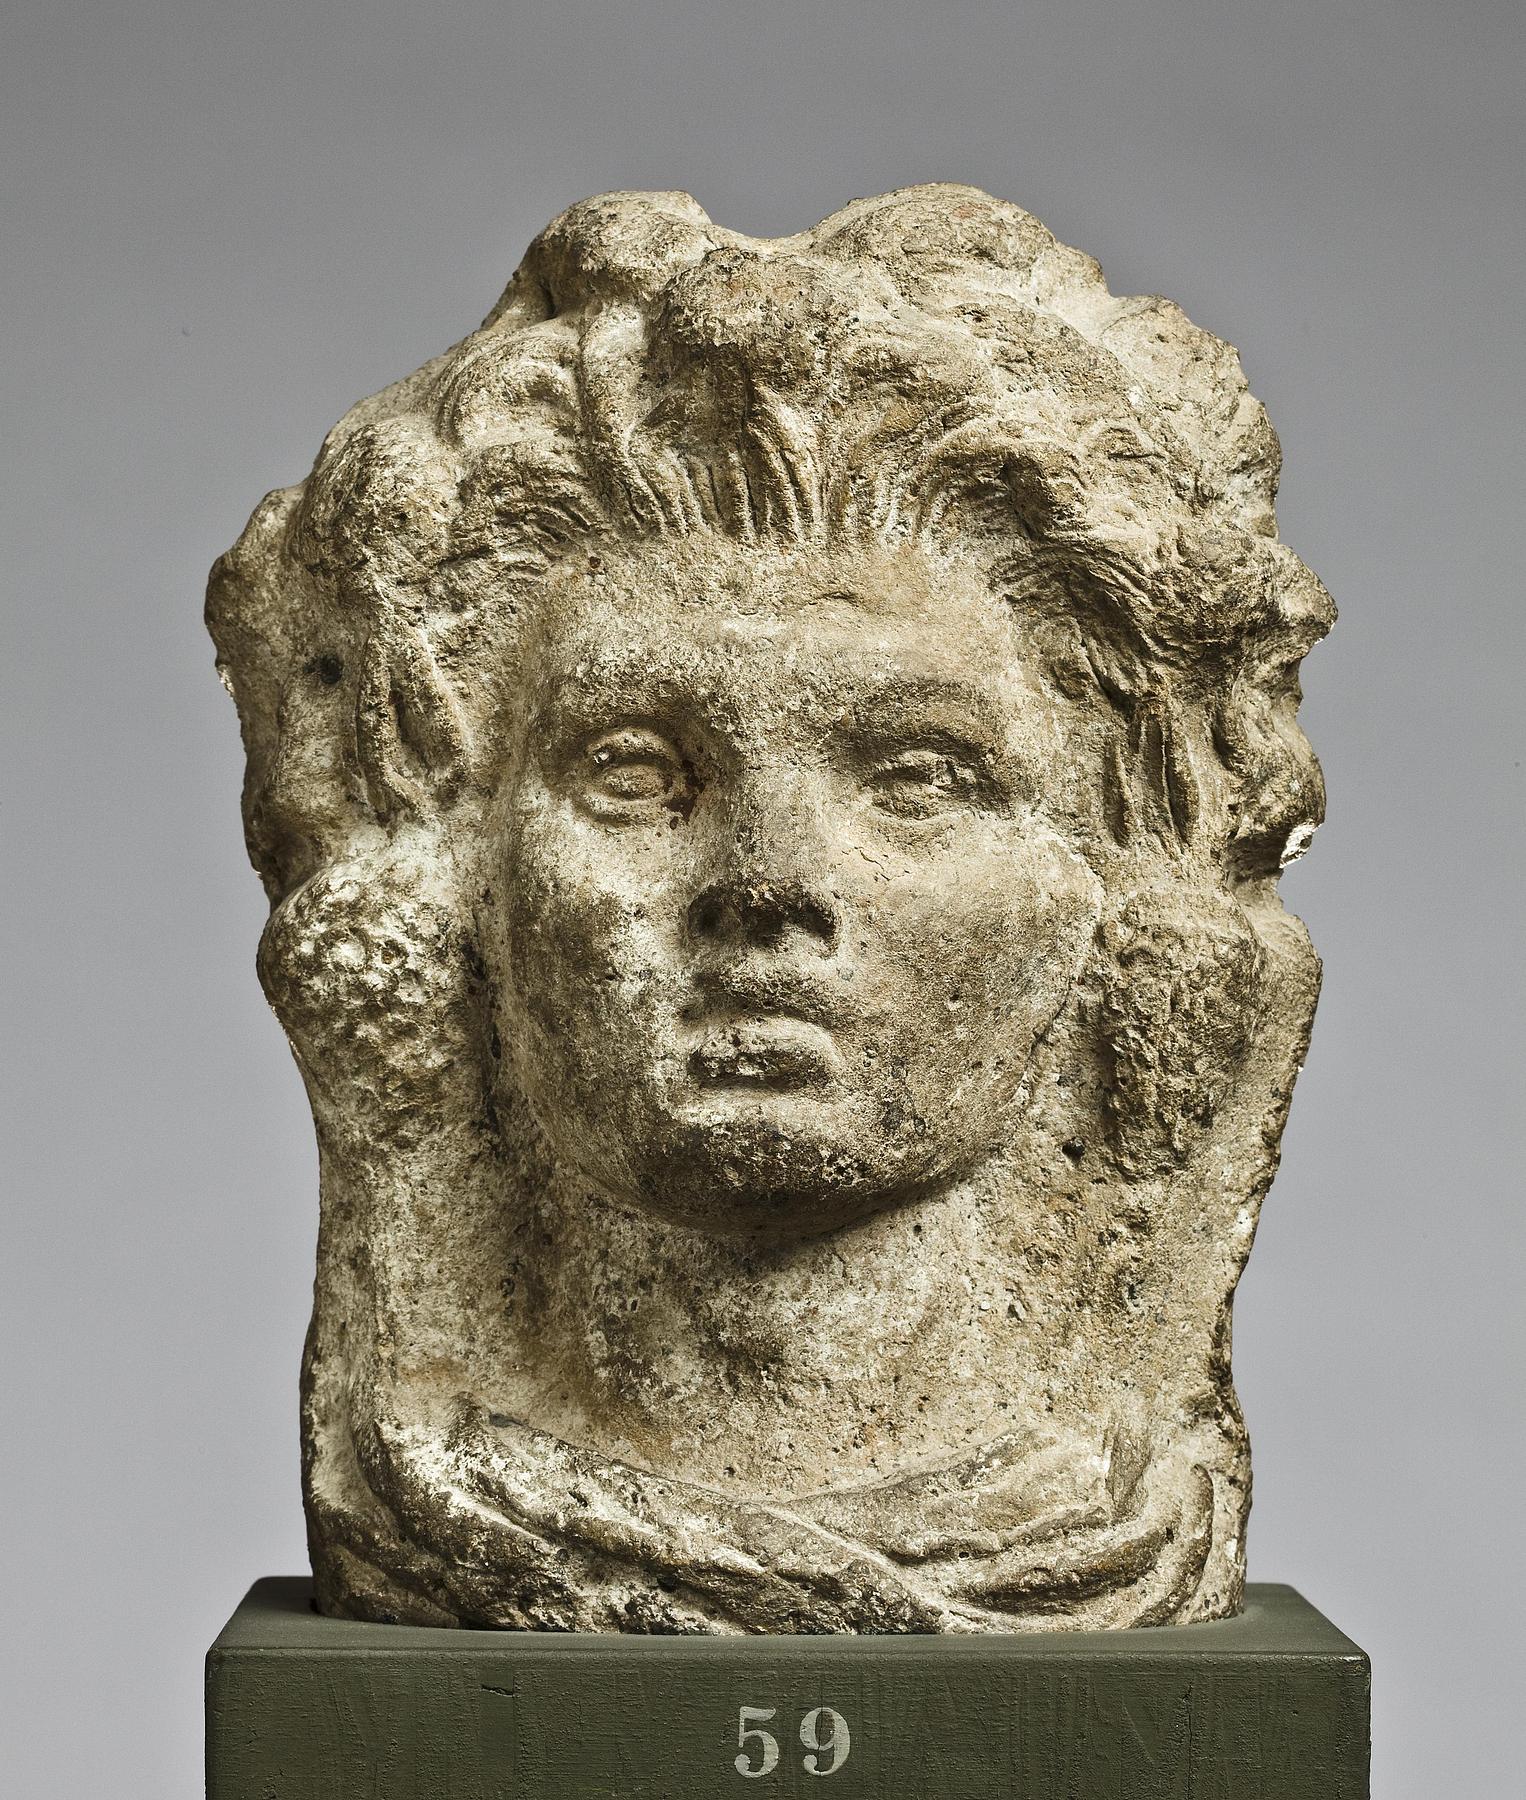 Antefix in the shape of a satyr's head, H1059